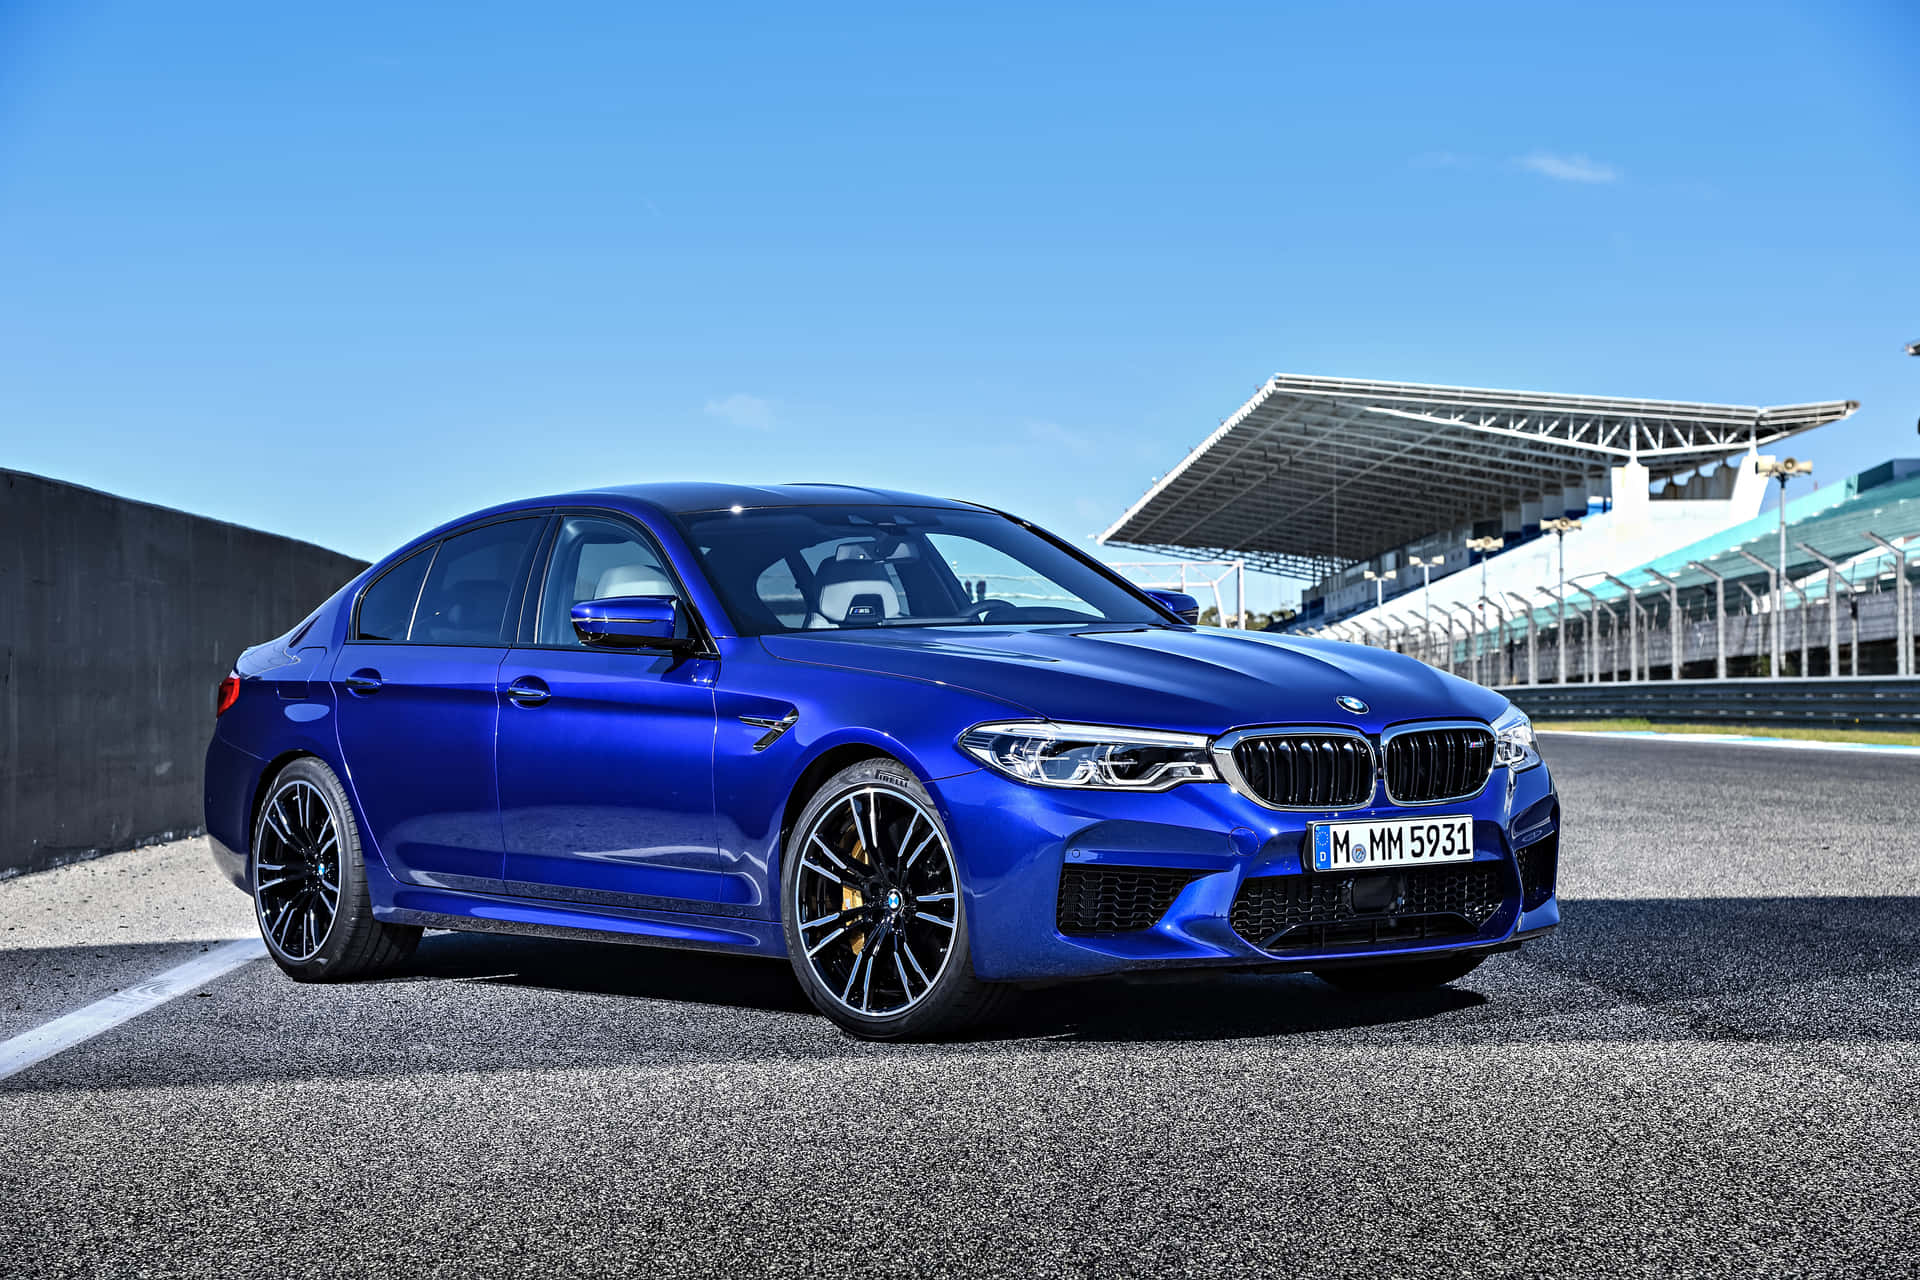 The BMW M5 4K shows an admirable luxury and performance. Wallpaper